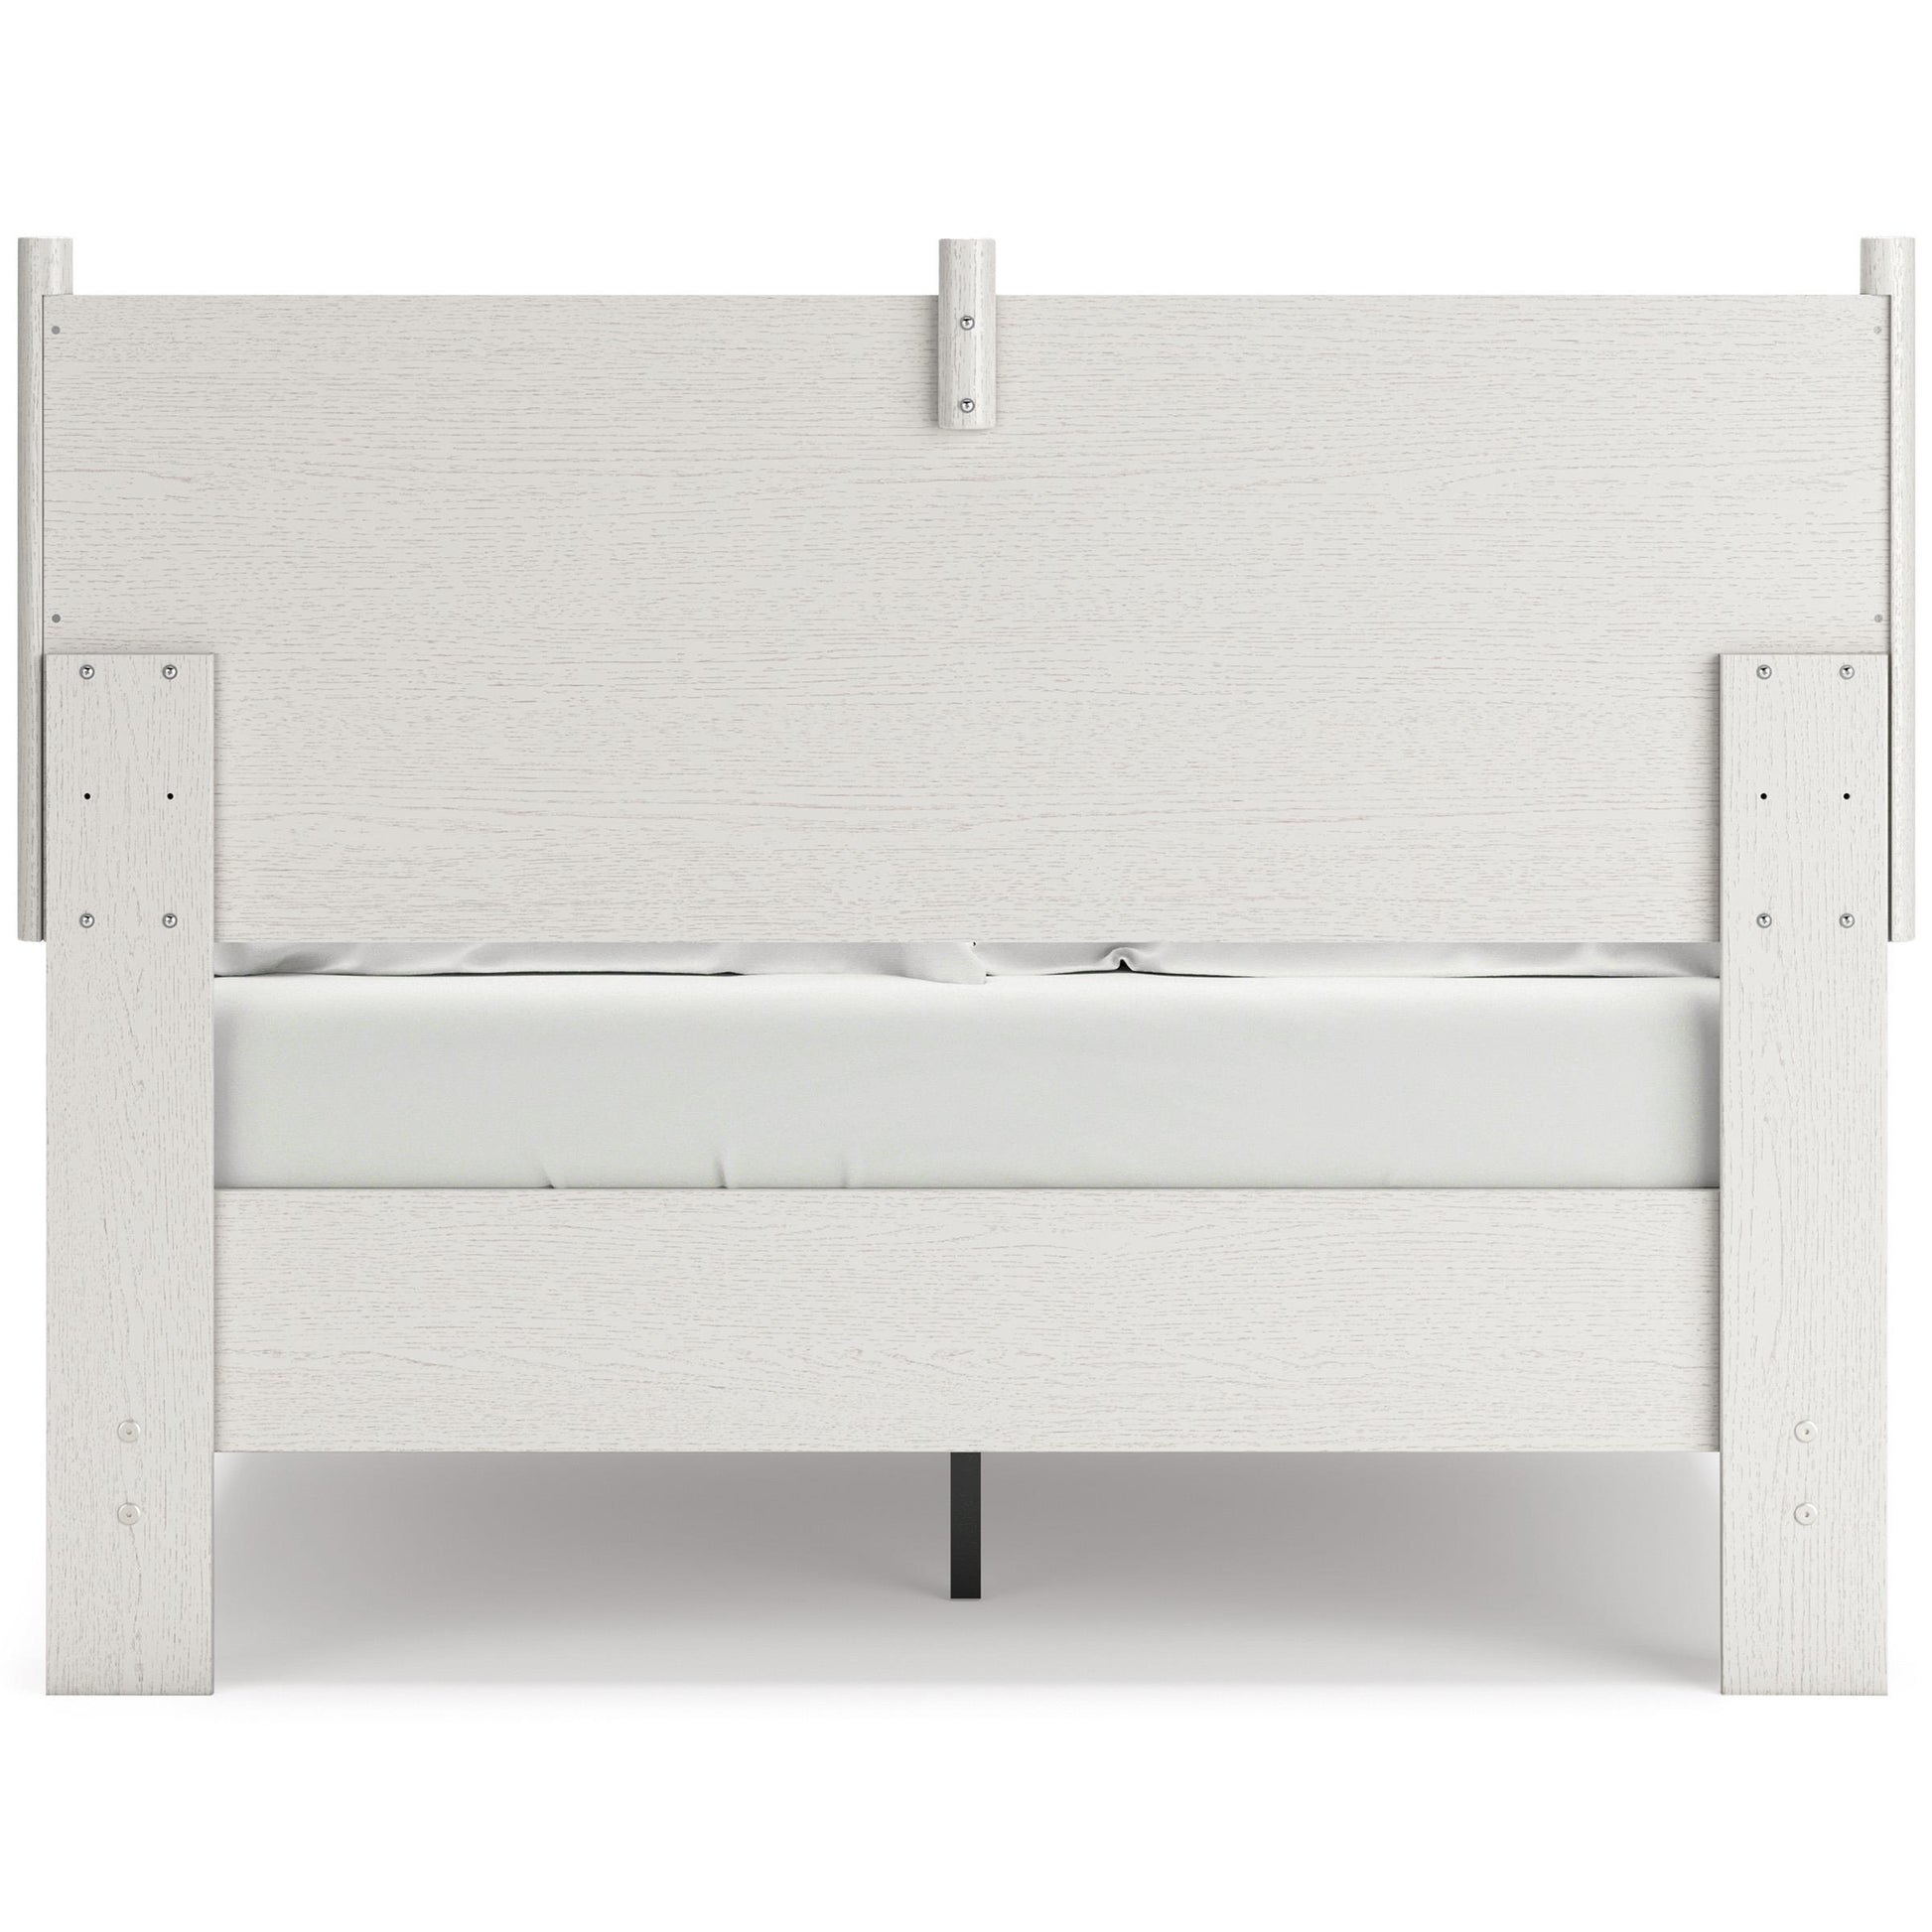 Signature Design by Ashley Kids Beds Bed EB1024-112/EB1024-156 IMAGE 4